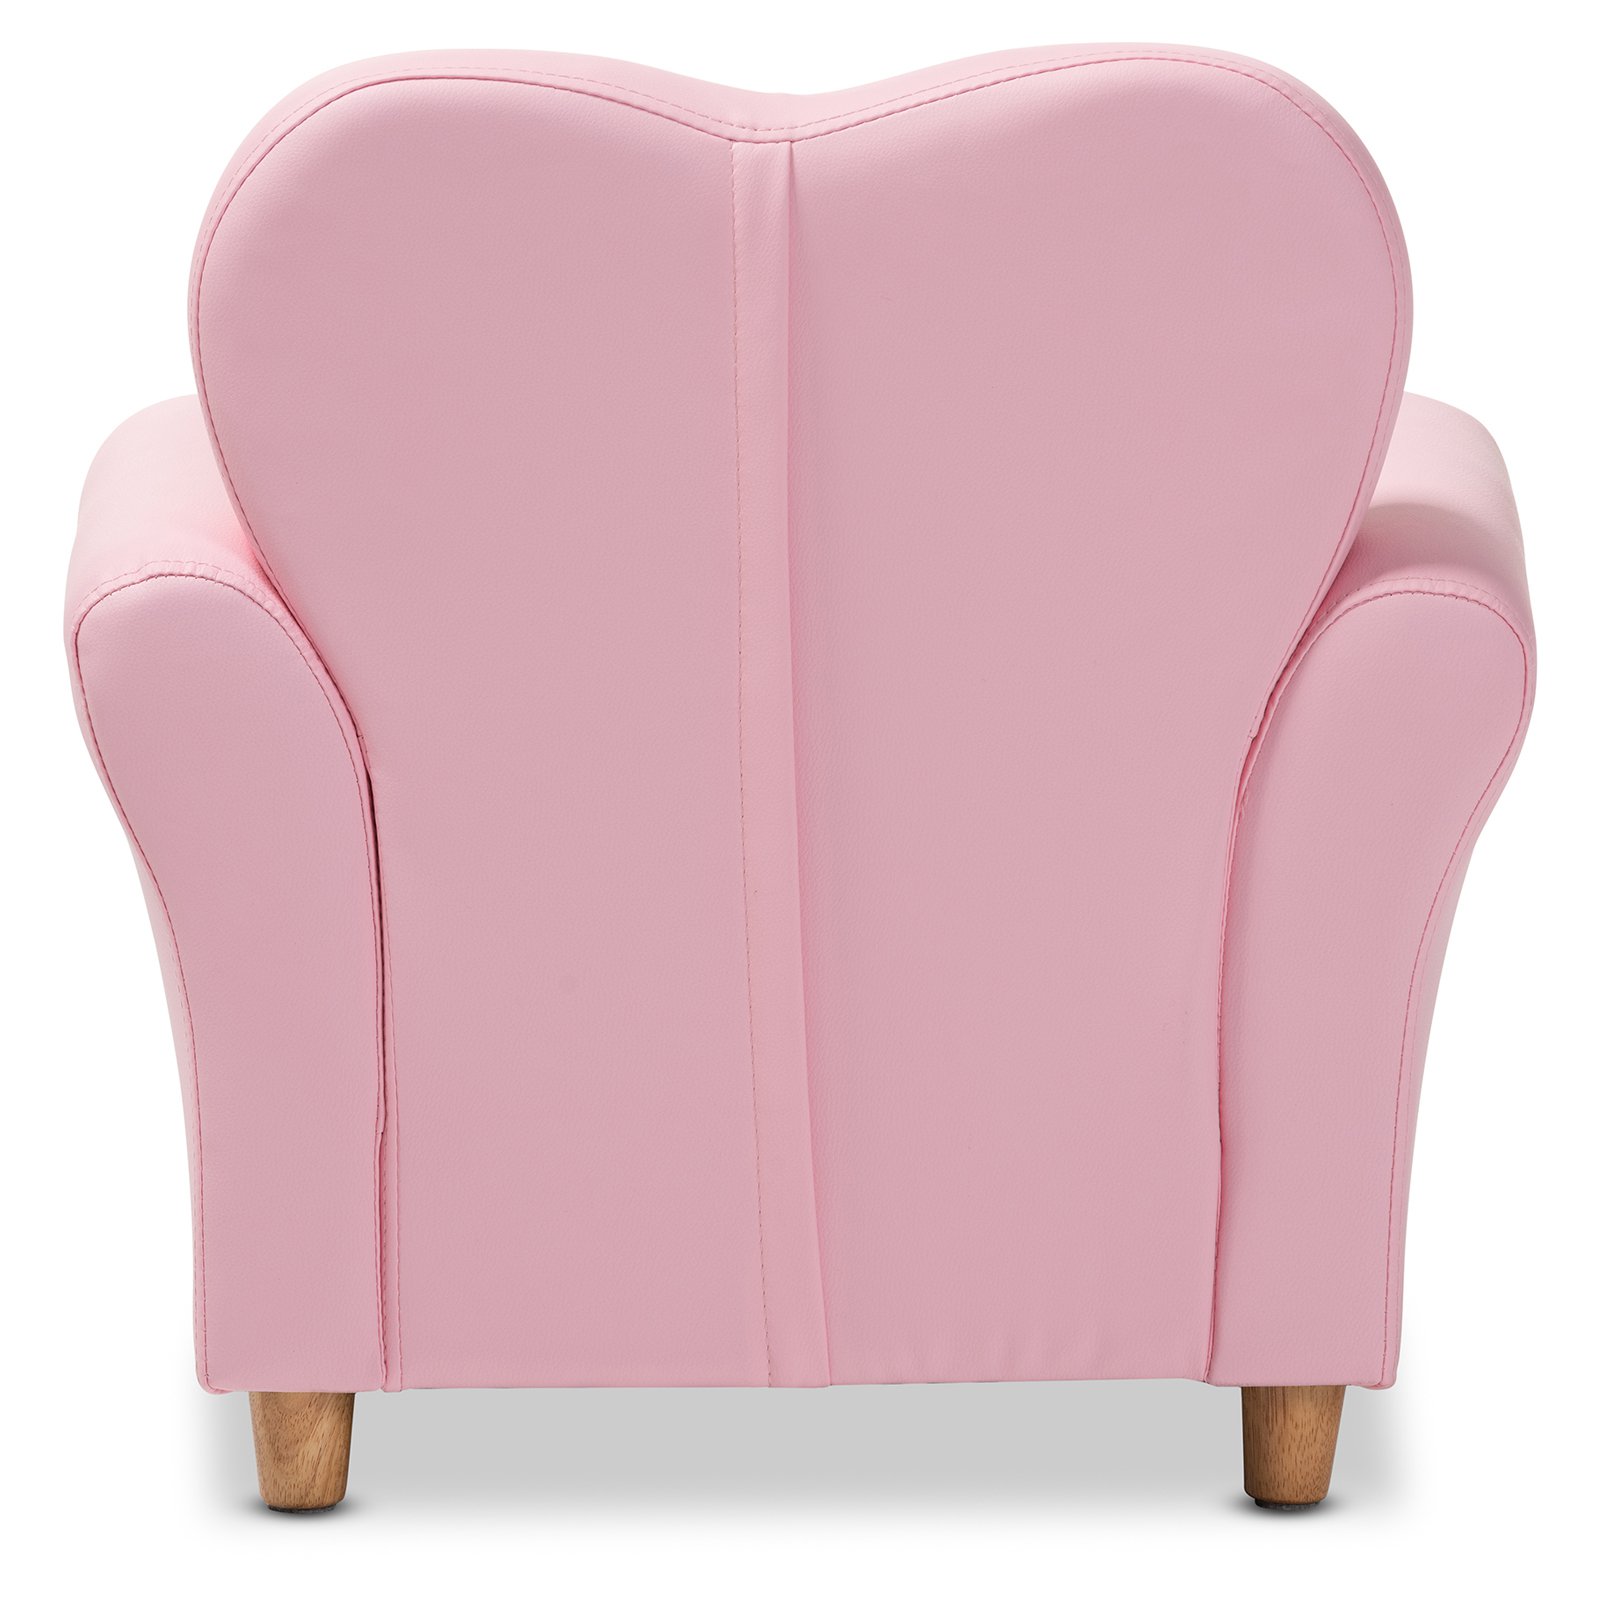 Baxton Studio Mabel Modern and Contemporary Pink Faux Leather Kids Armchair - image 4 of 8